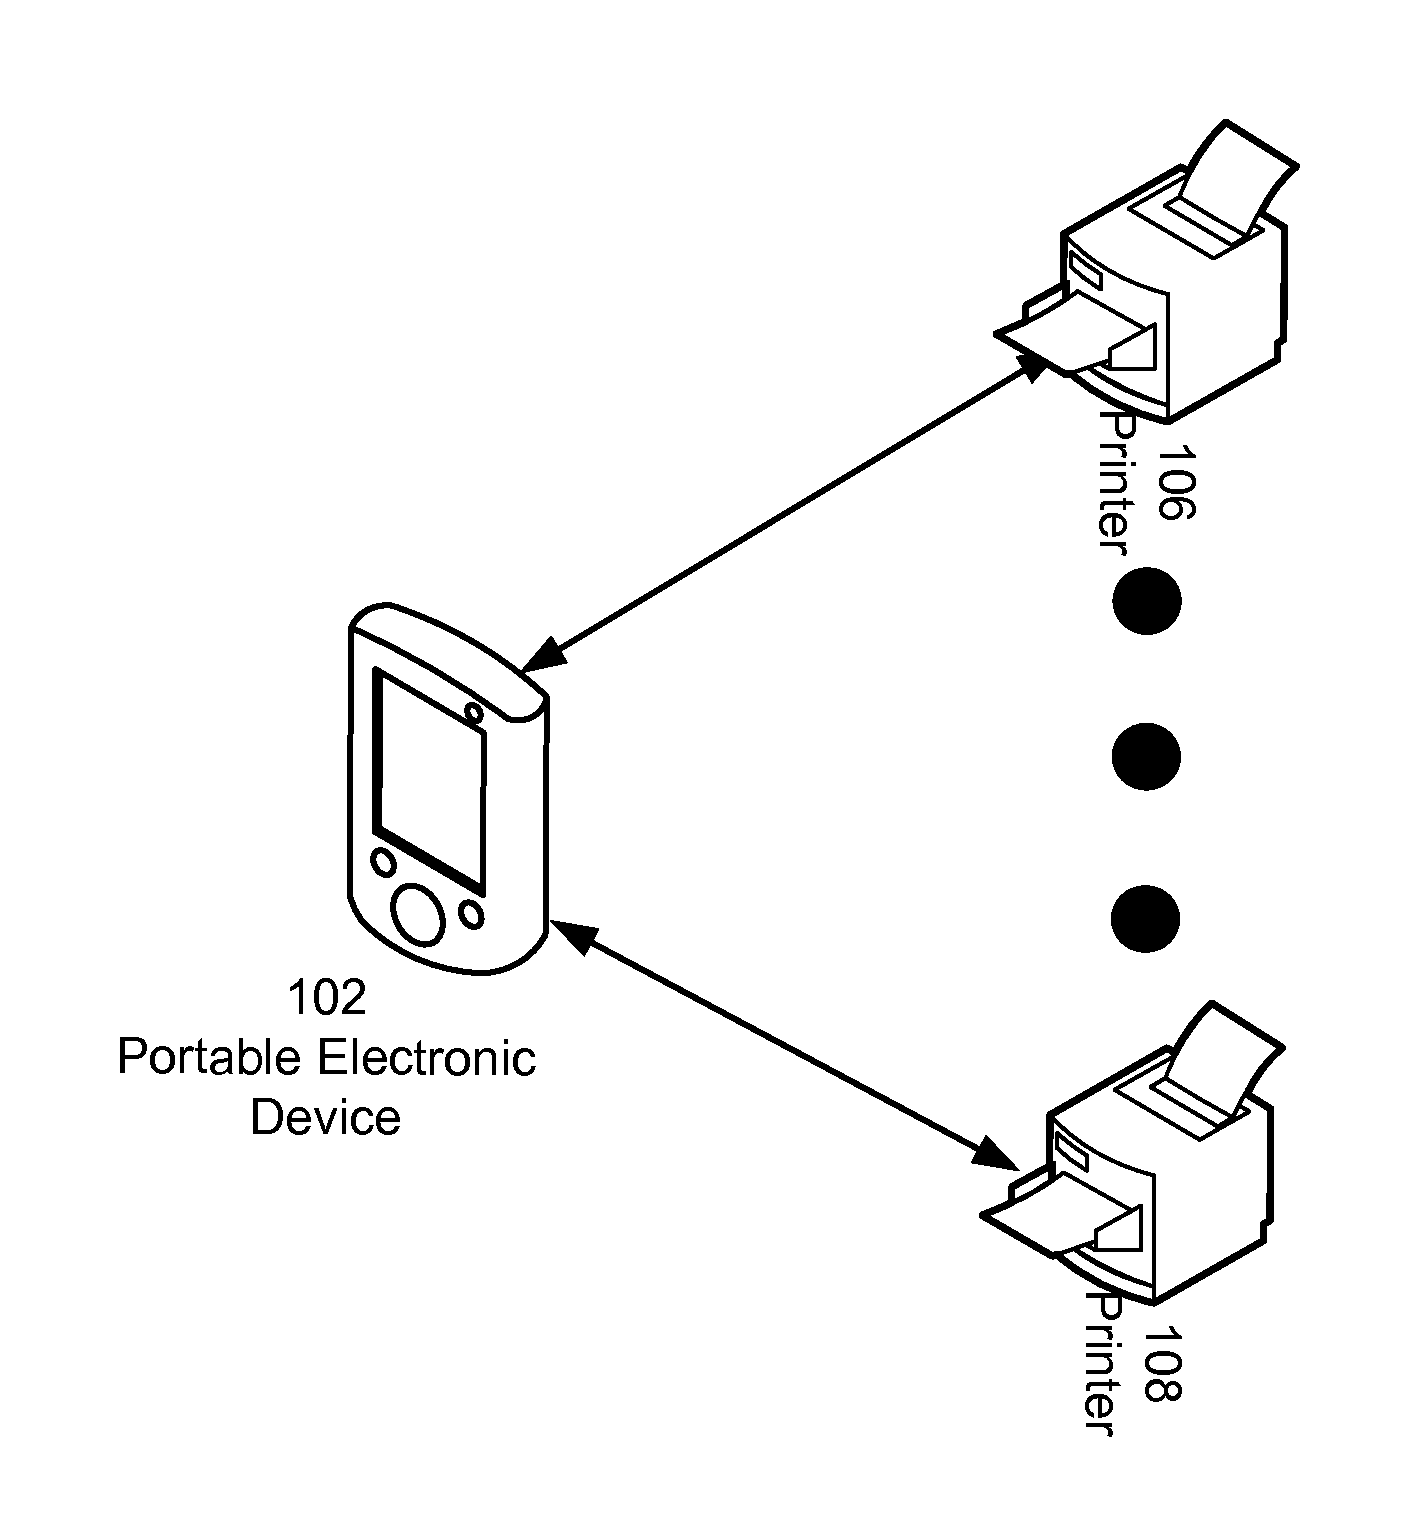 Configuration of print data for print jobs based on document-processing capabilities of printers